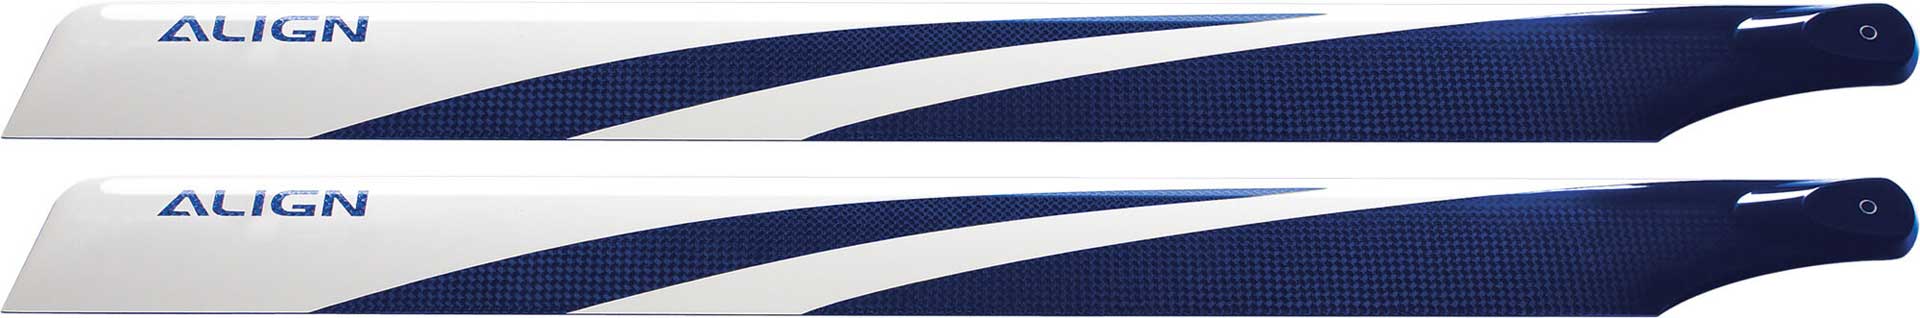 ALIGN MAIN ROTOR BLADES 360 MM CARBON BLUE